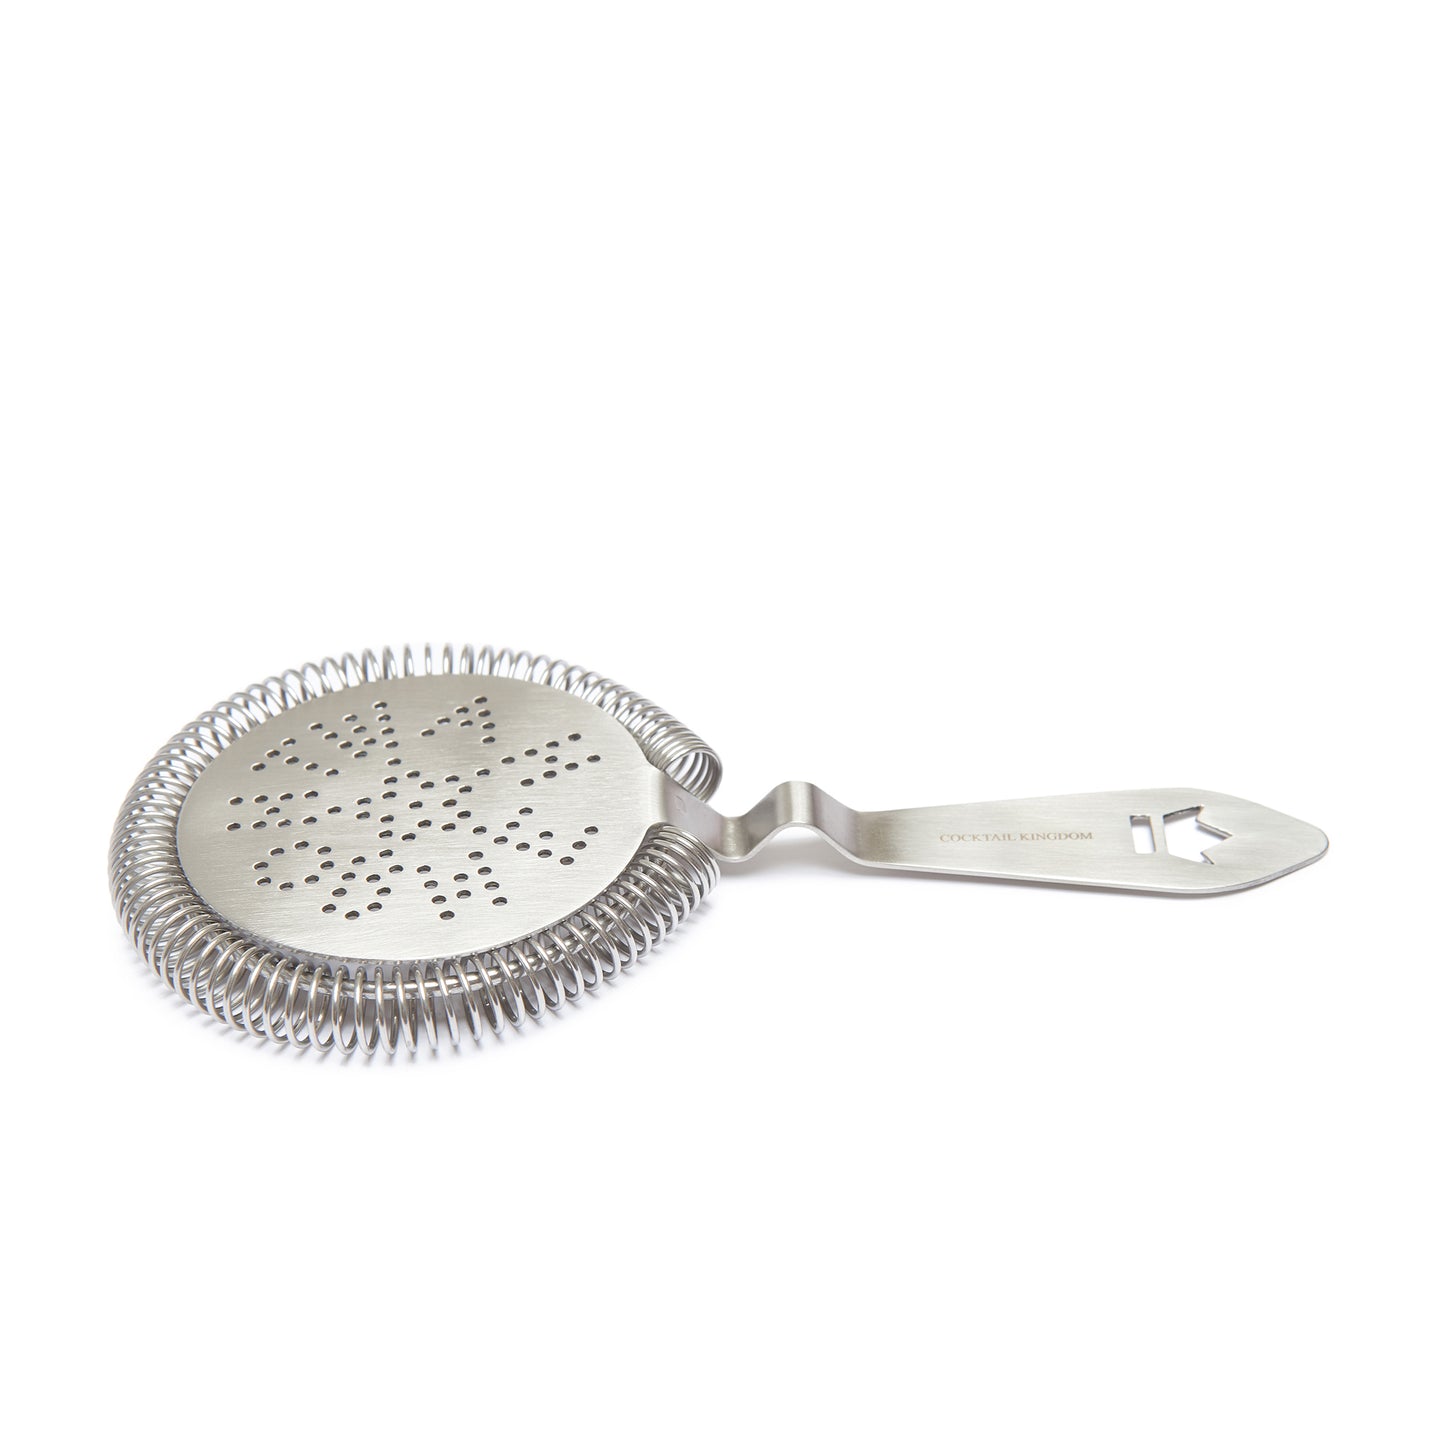 LARGE ANTIQUE-STYLE COCKTAIL STRAINER / STAINLESS STEEL